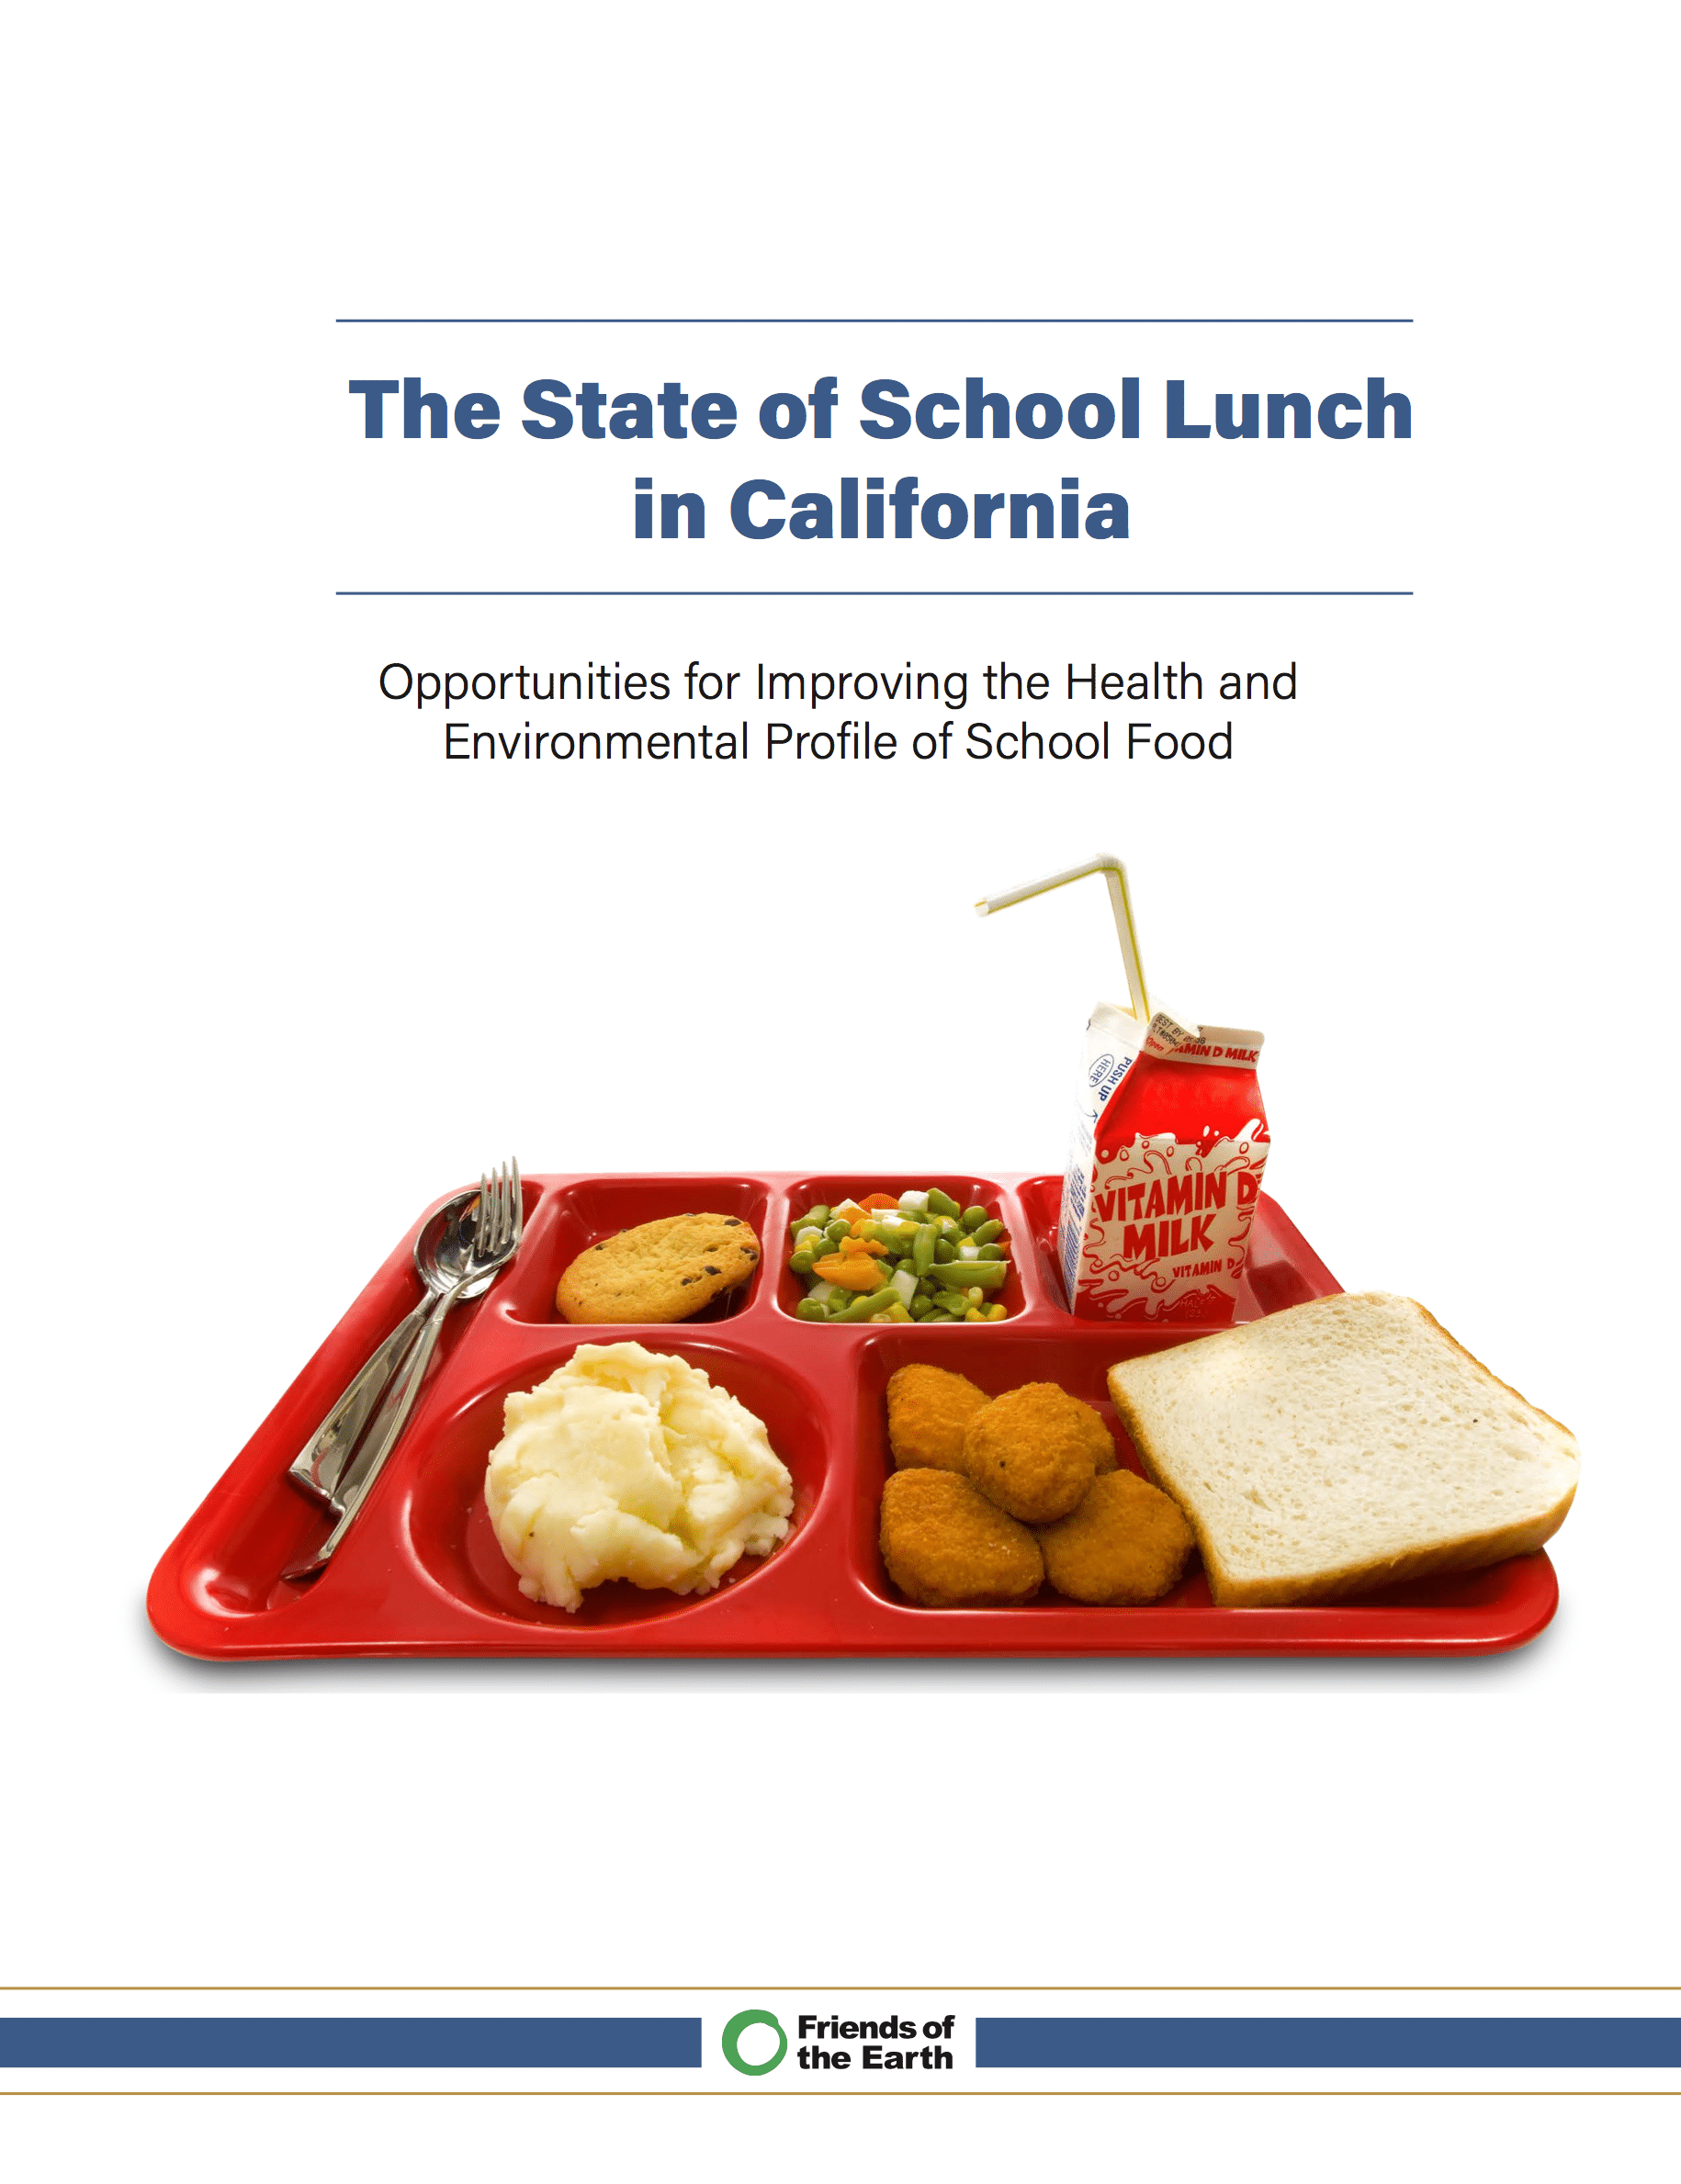 The State of School Lunch in California